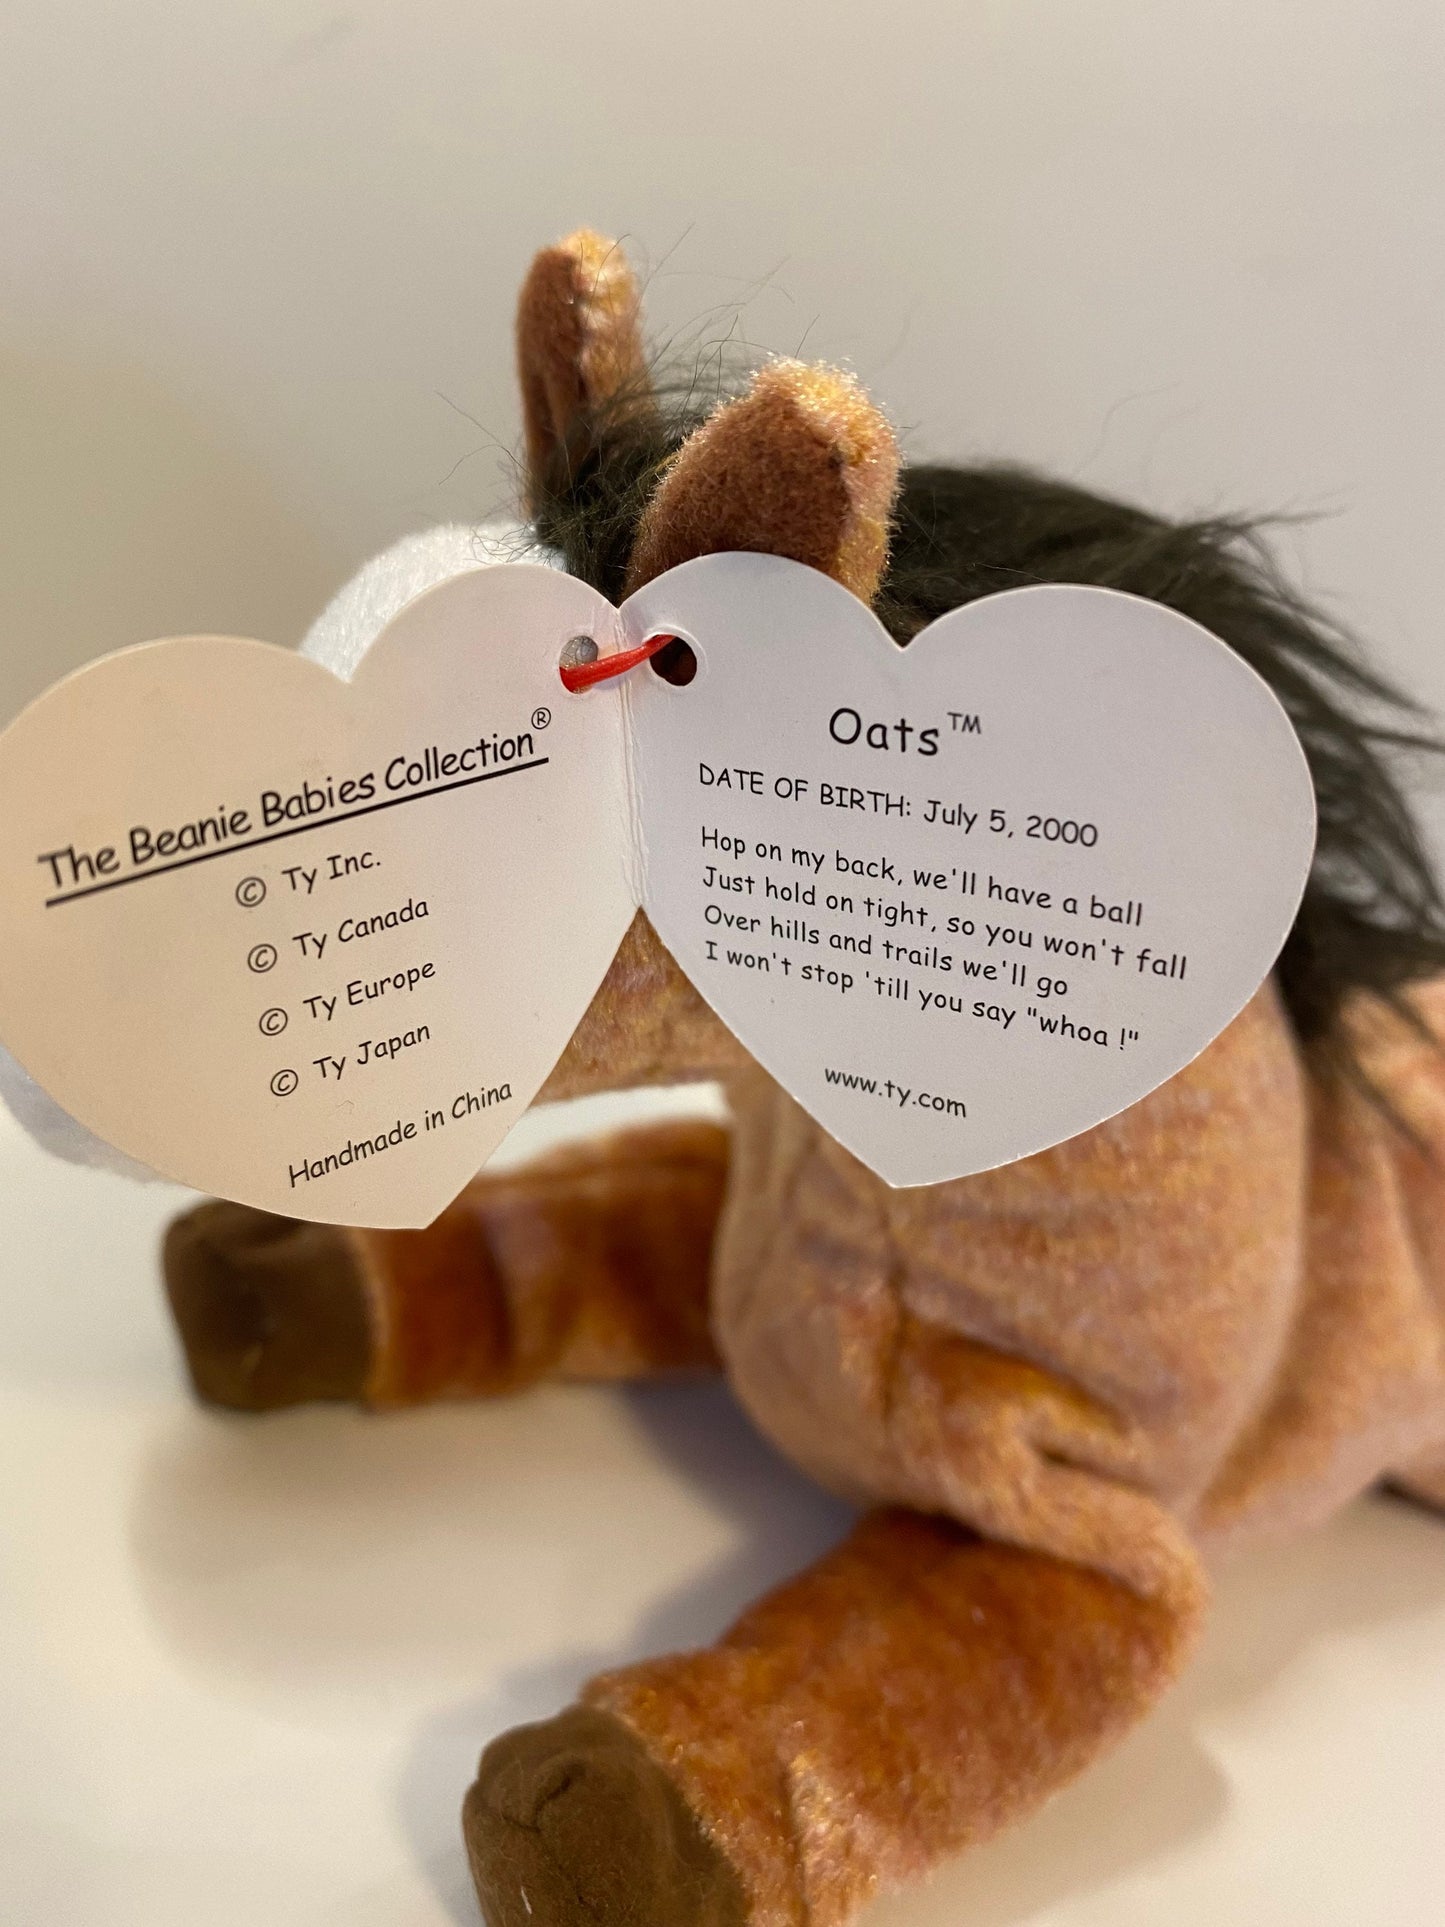 Ty Beanie Baby “Oats” the Horse! (7 inch)